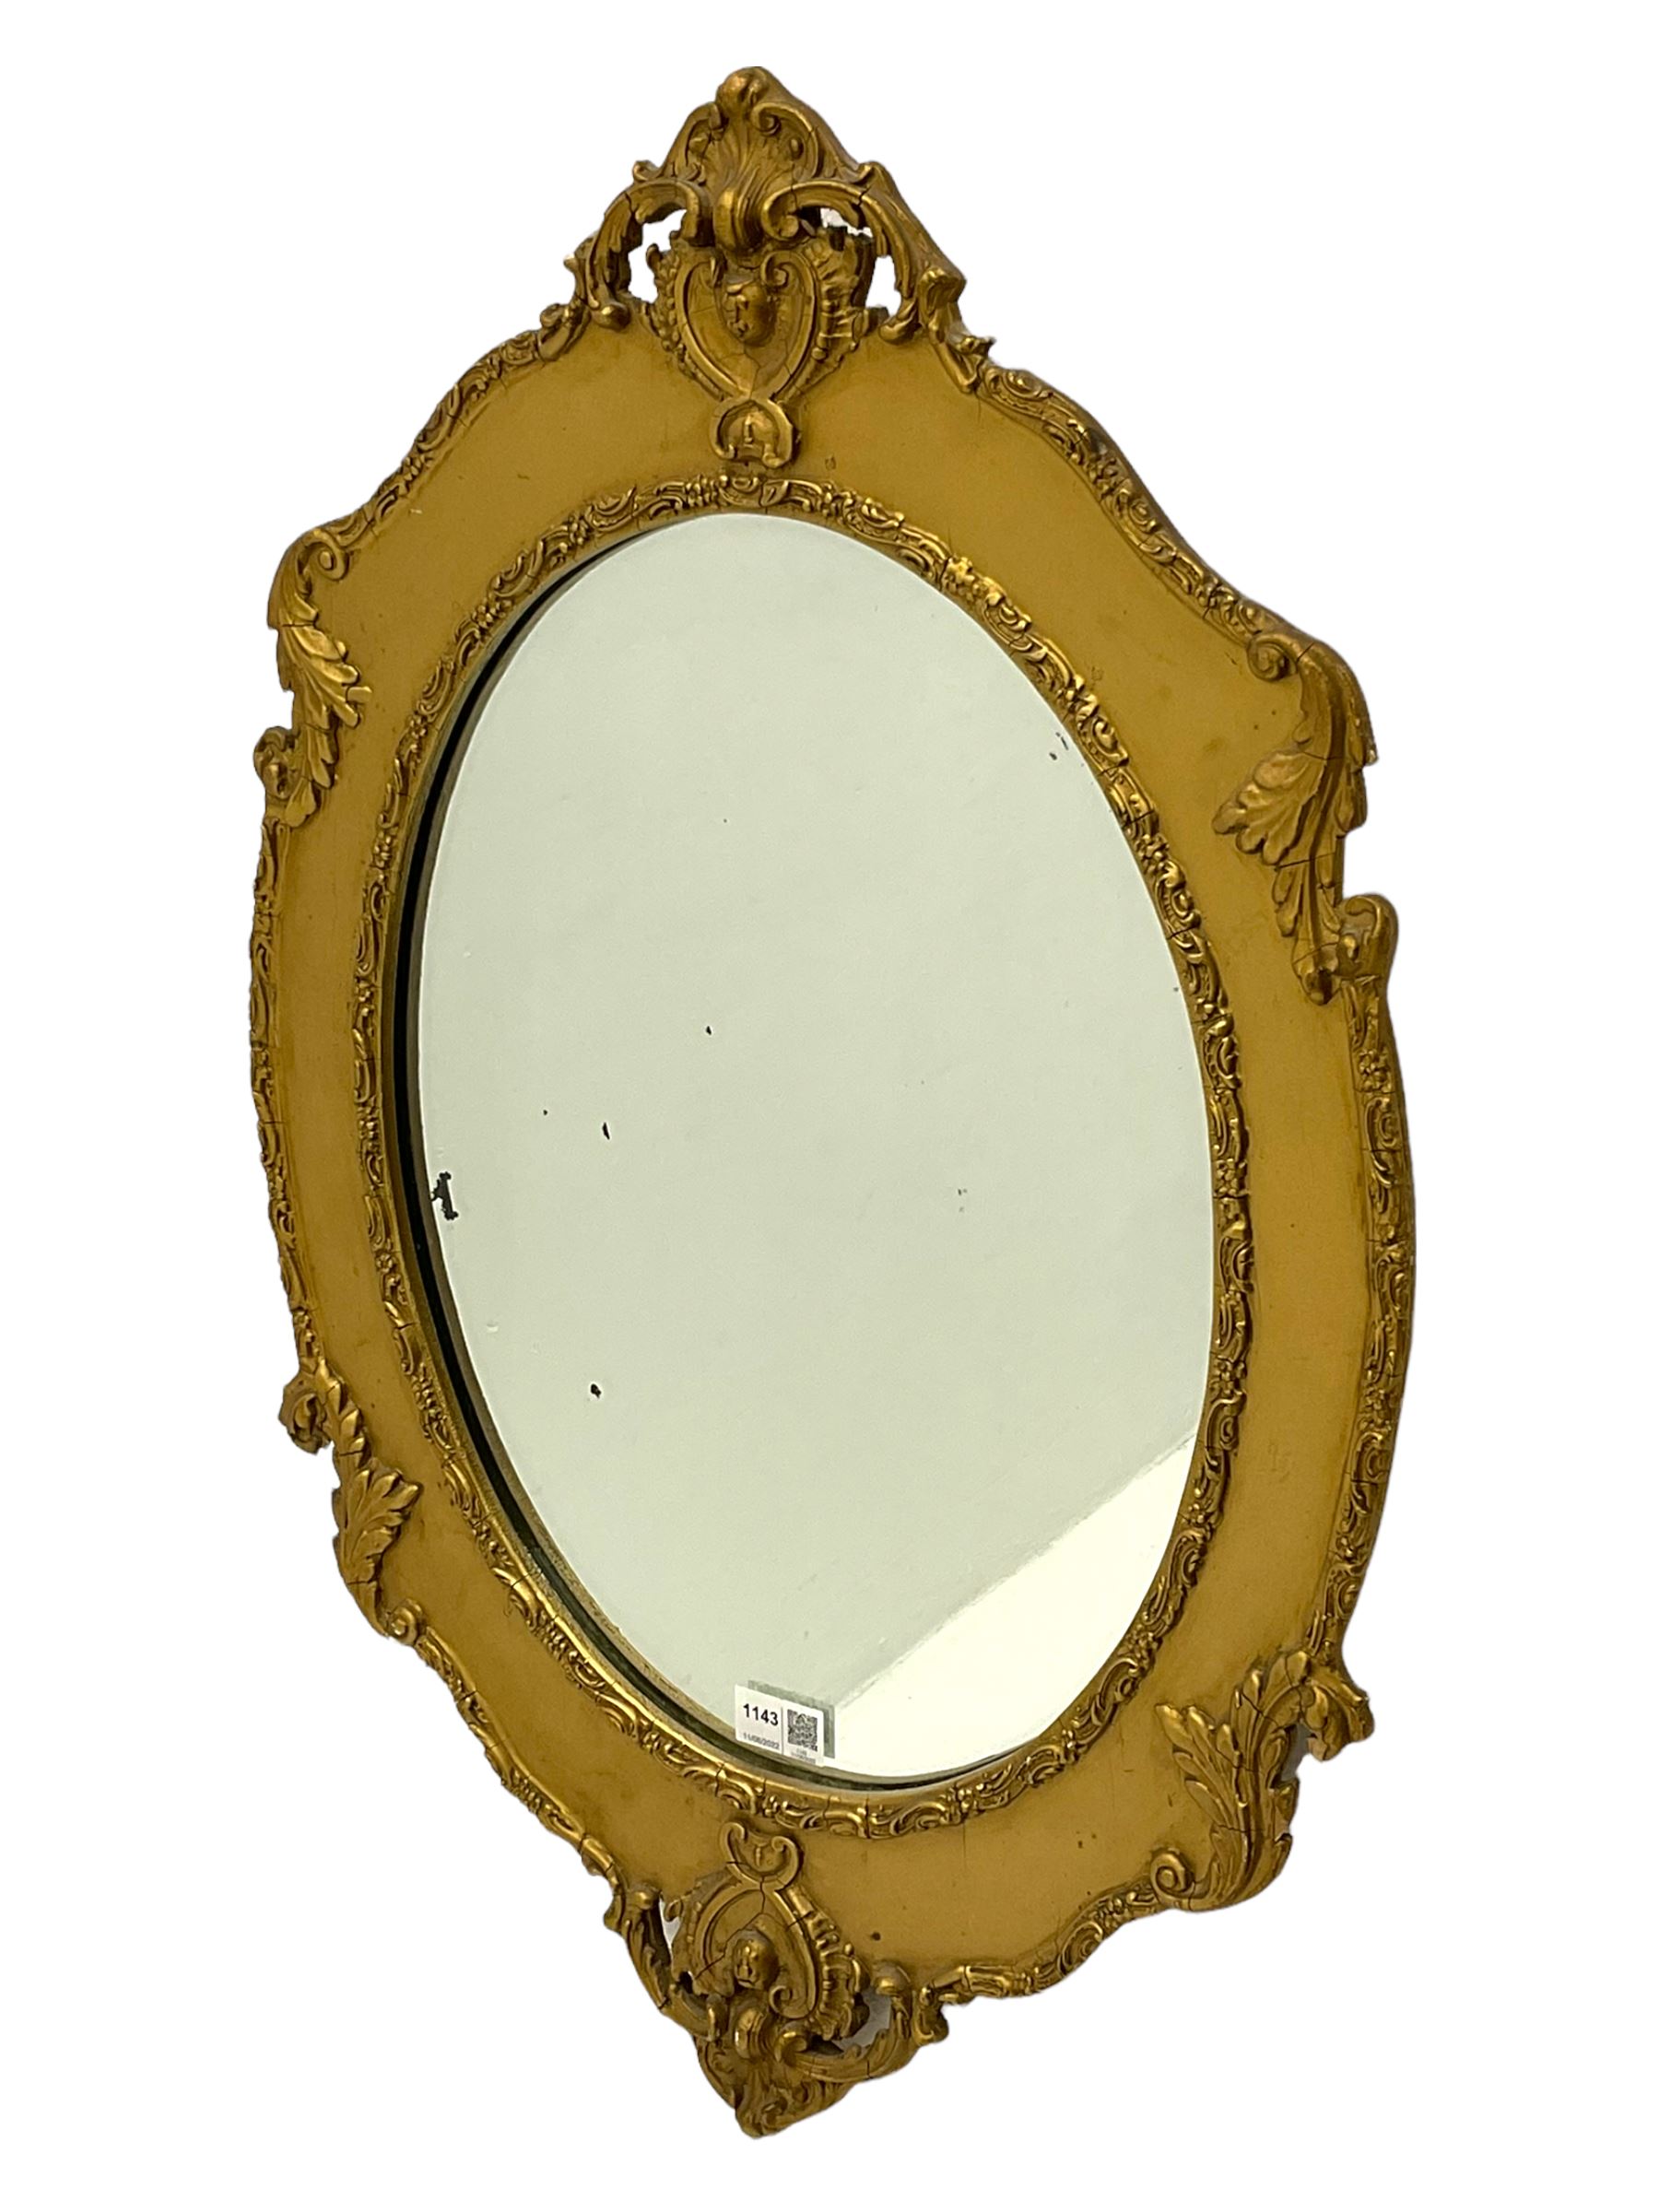 Early 20th century gilt wood and gesso wall mirror